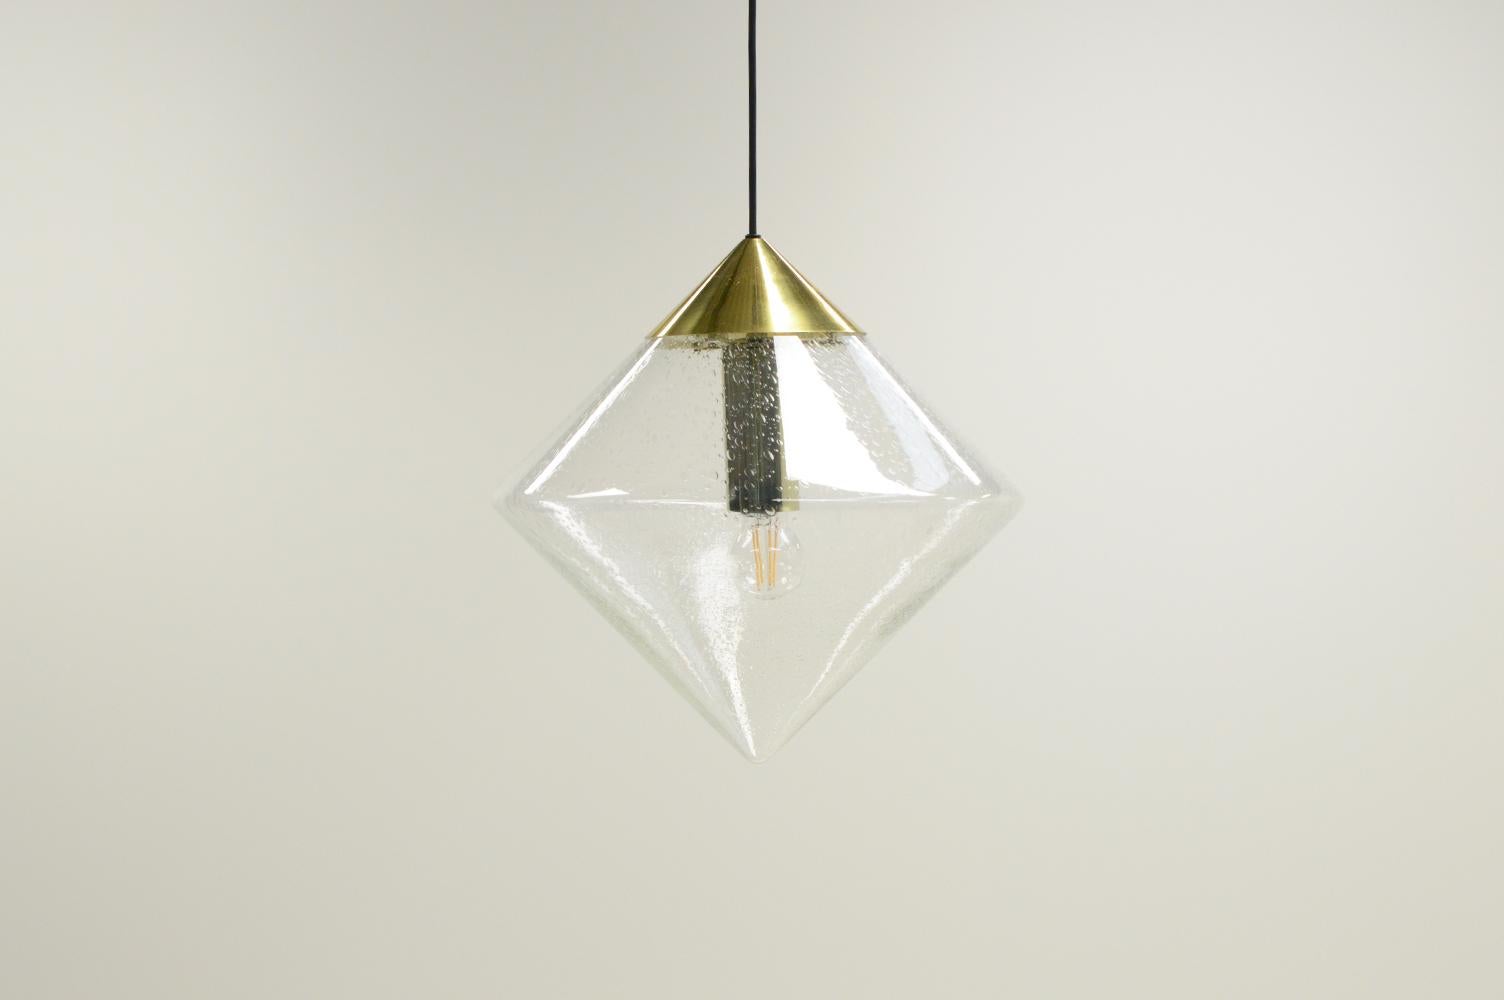 Rare B-1218 pendant by Raak Amsterdam, 1970s the netherlands. Diamond shape with hand blown bubble glass and brass color details. E27 light bulb holder. In very good vintage condition.

Request a quote for the latest shipping rates.